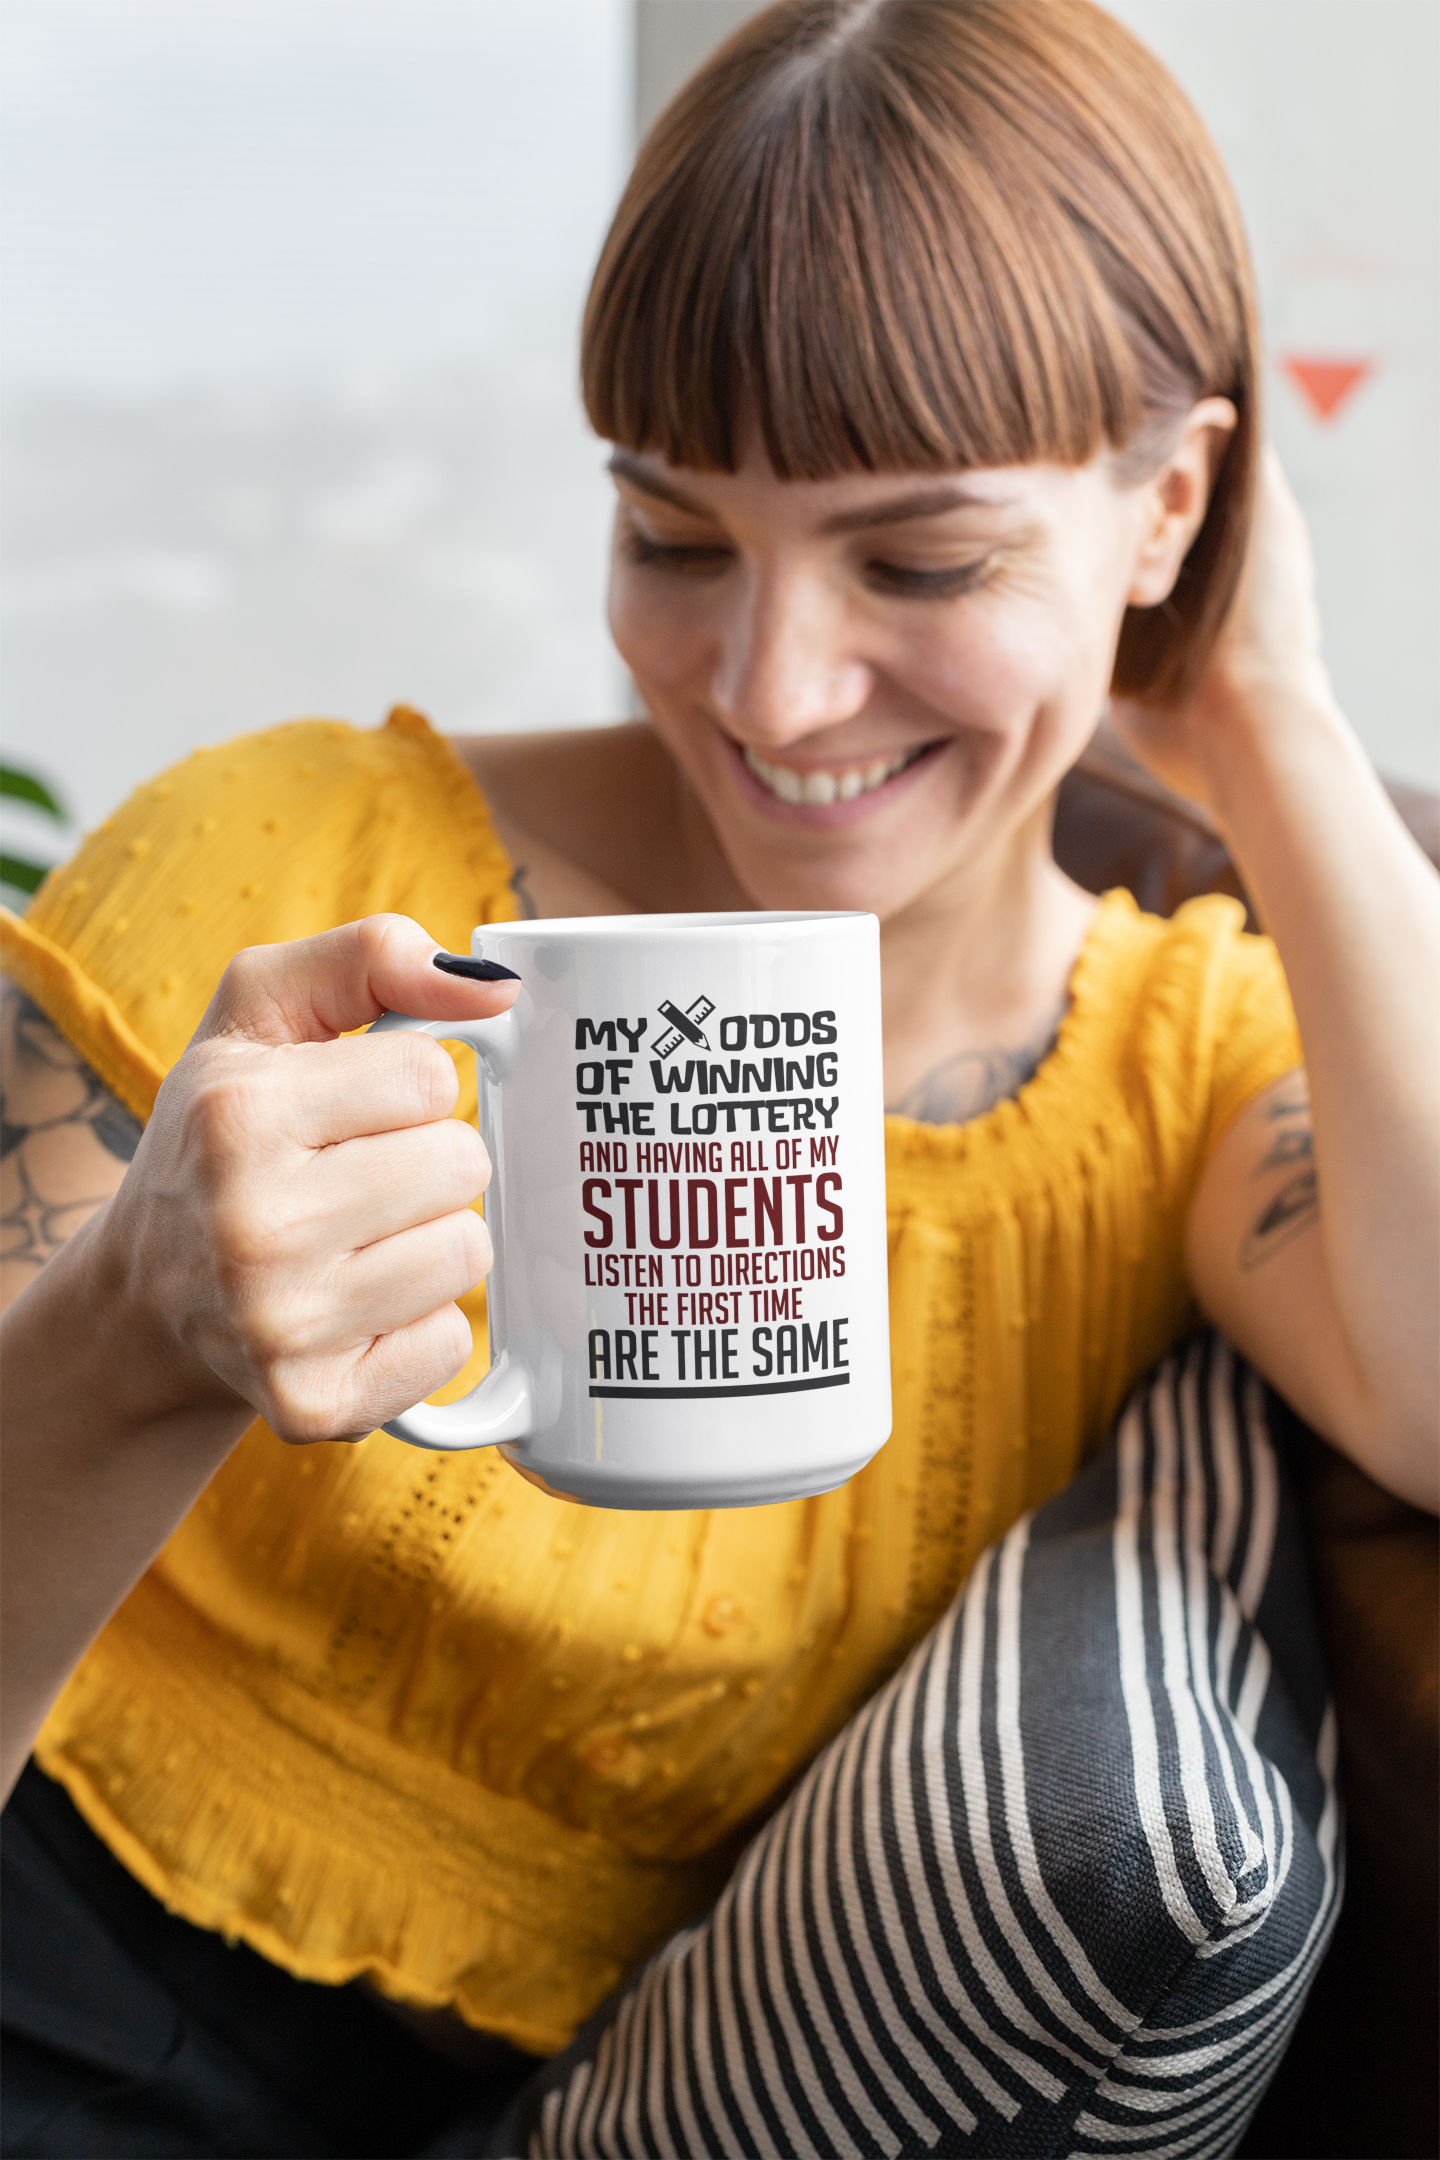 My Odds Of Winning The Lottery And Having All Of My Students Listen Are The Same. Funny Teaching Coffee & Tea Mug For Best Teacher, Instructor, Professor, Educator, Adviser & Young Scholar (11oz) - image 2 of 3